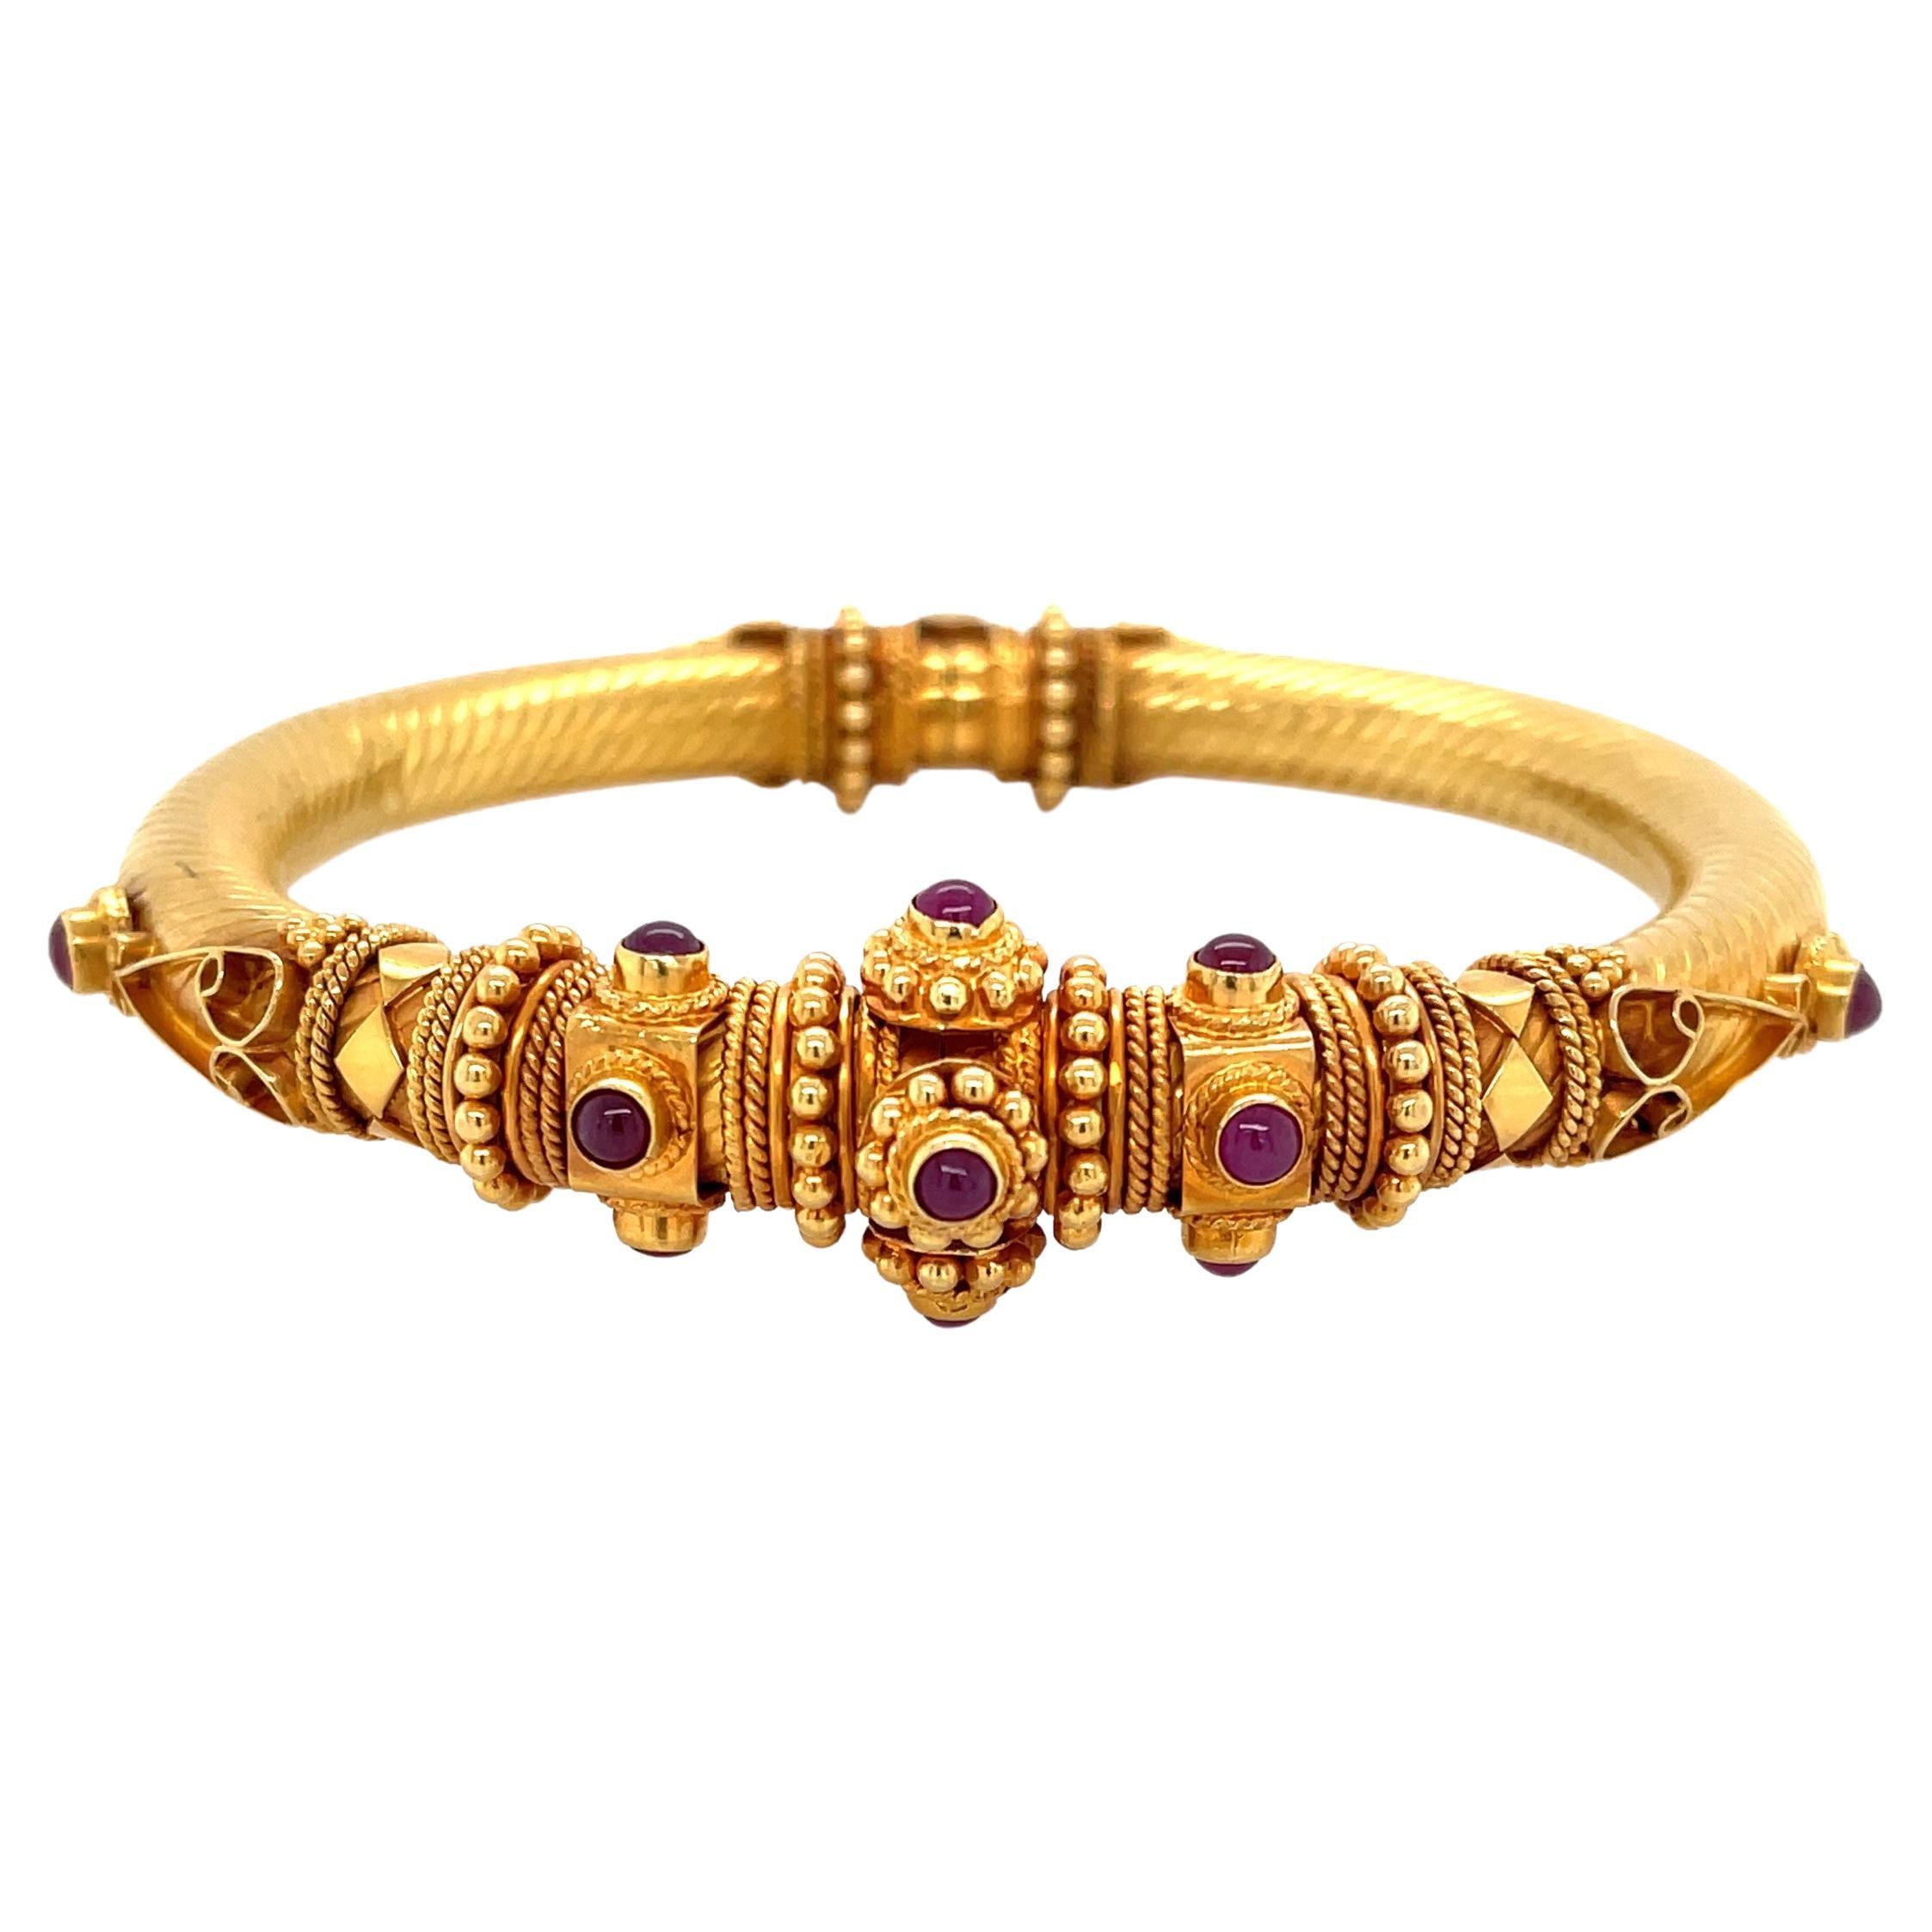 Outstanding artisan hand-crafted work is displayed within the intricate Boho style design of this spectacular bangle bracelet made of  eighteen karat 18K yellow gold 
Natural ruby cabochon gemstones, .45 carat total weight accent this artful piece.